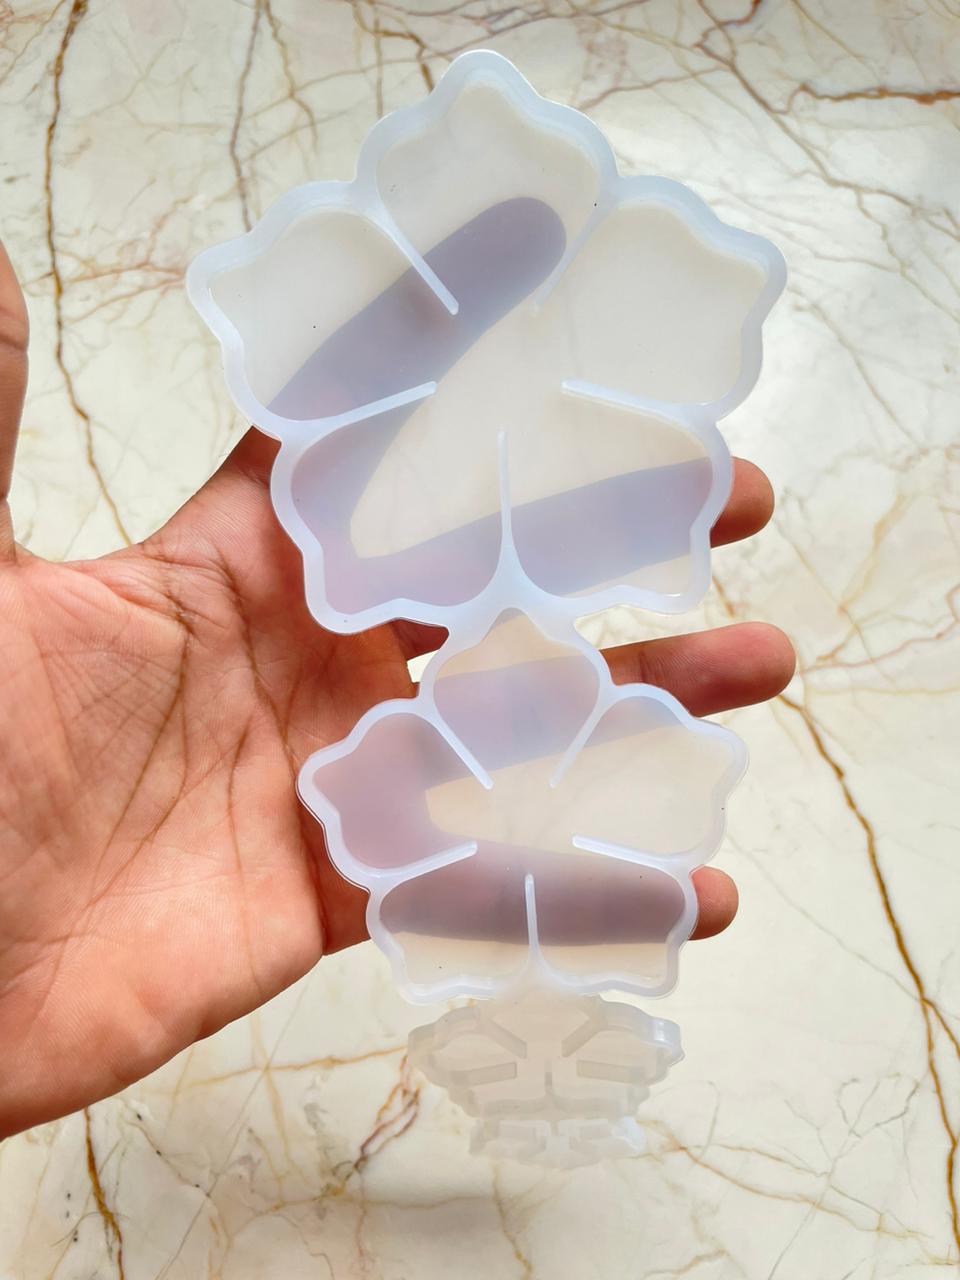 4 in 1 flower mould - Pack of 12